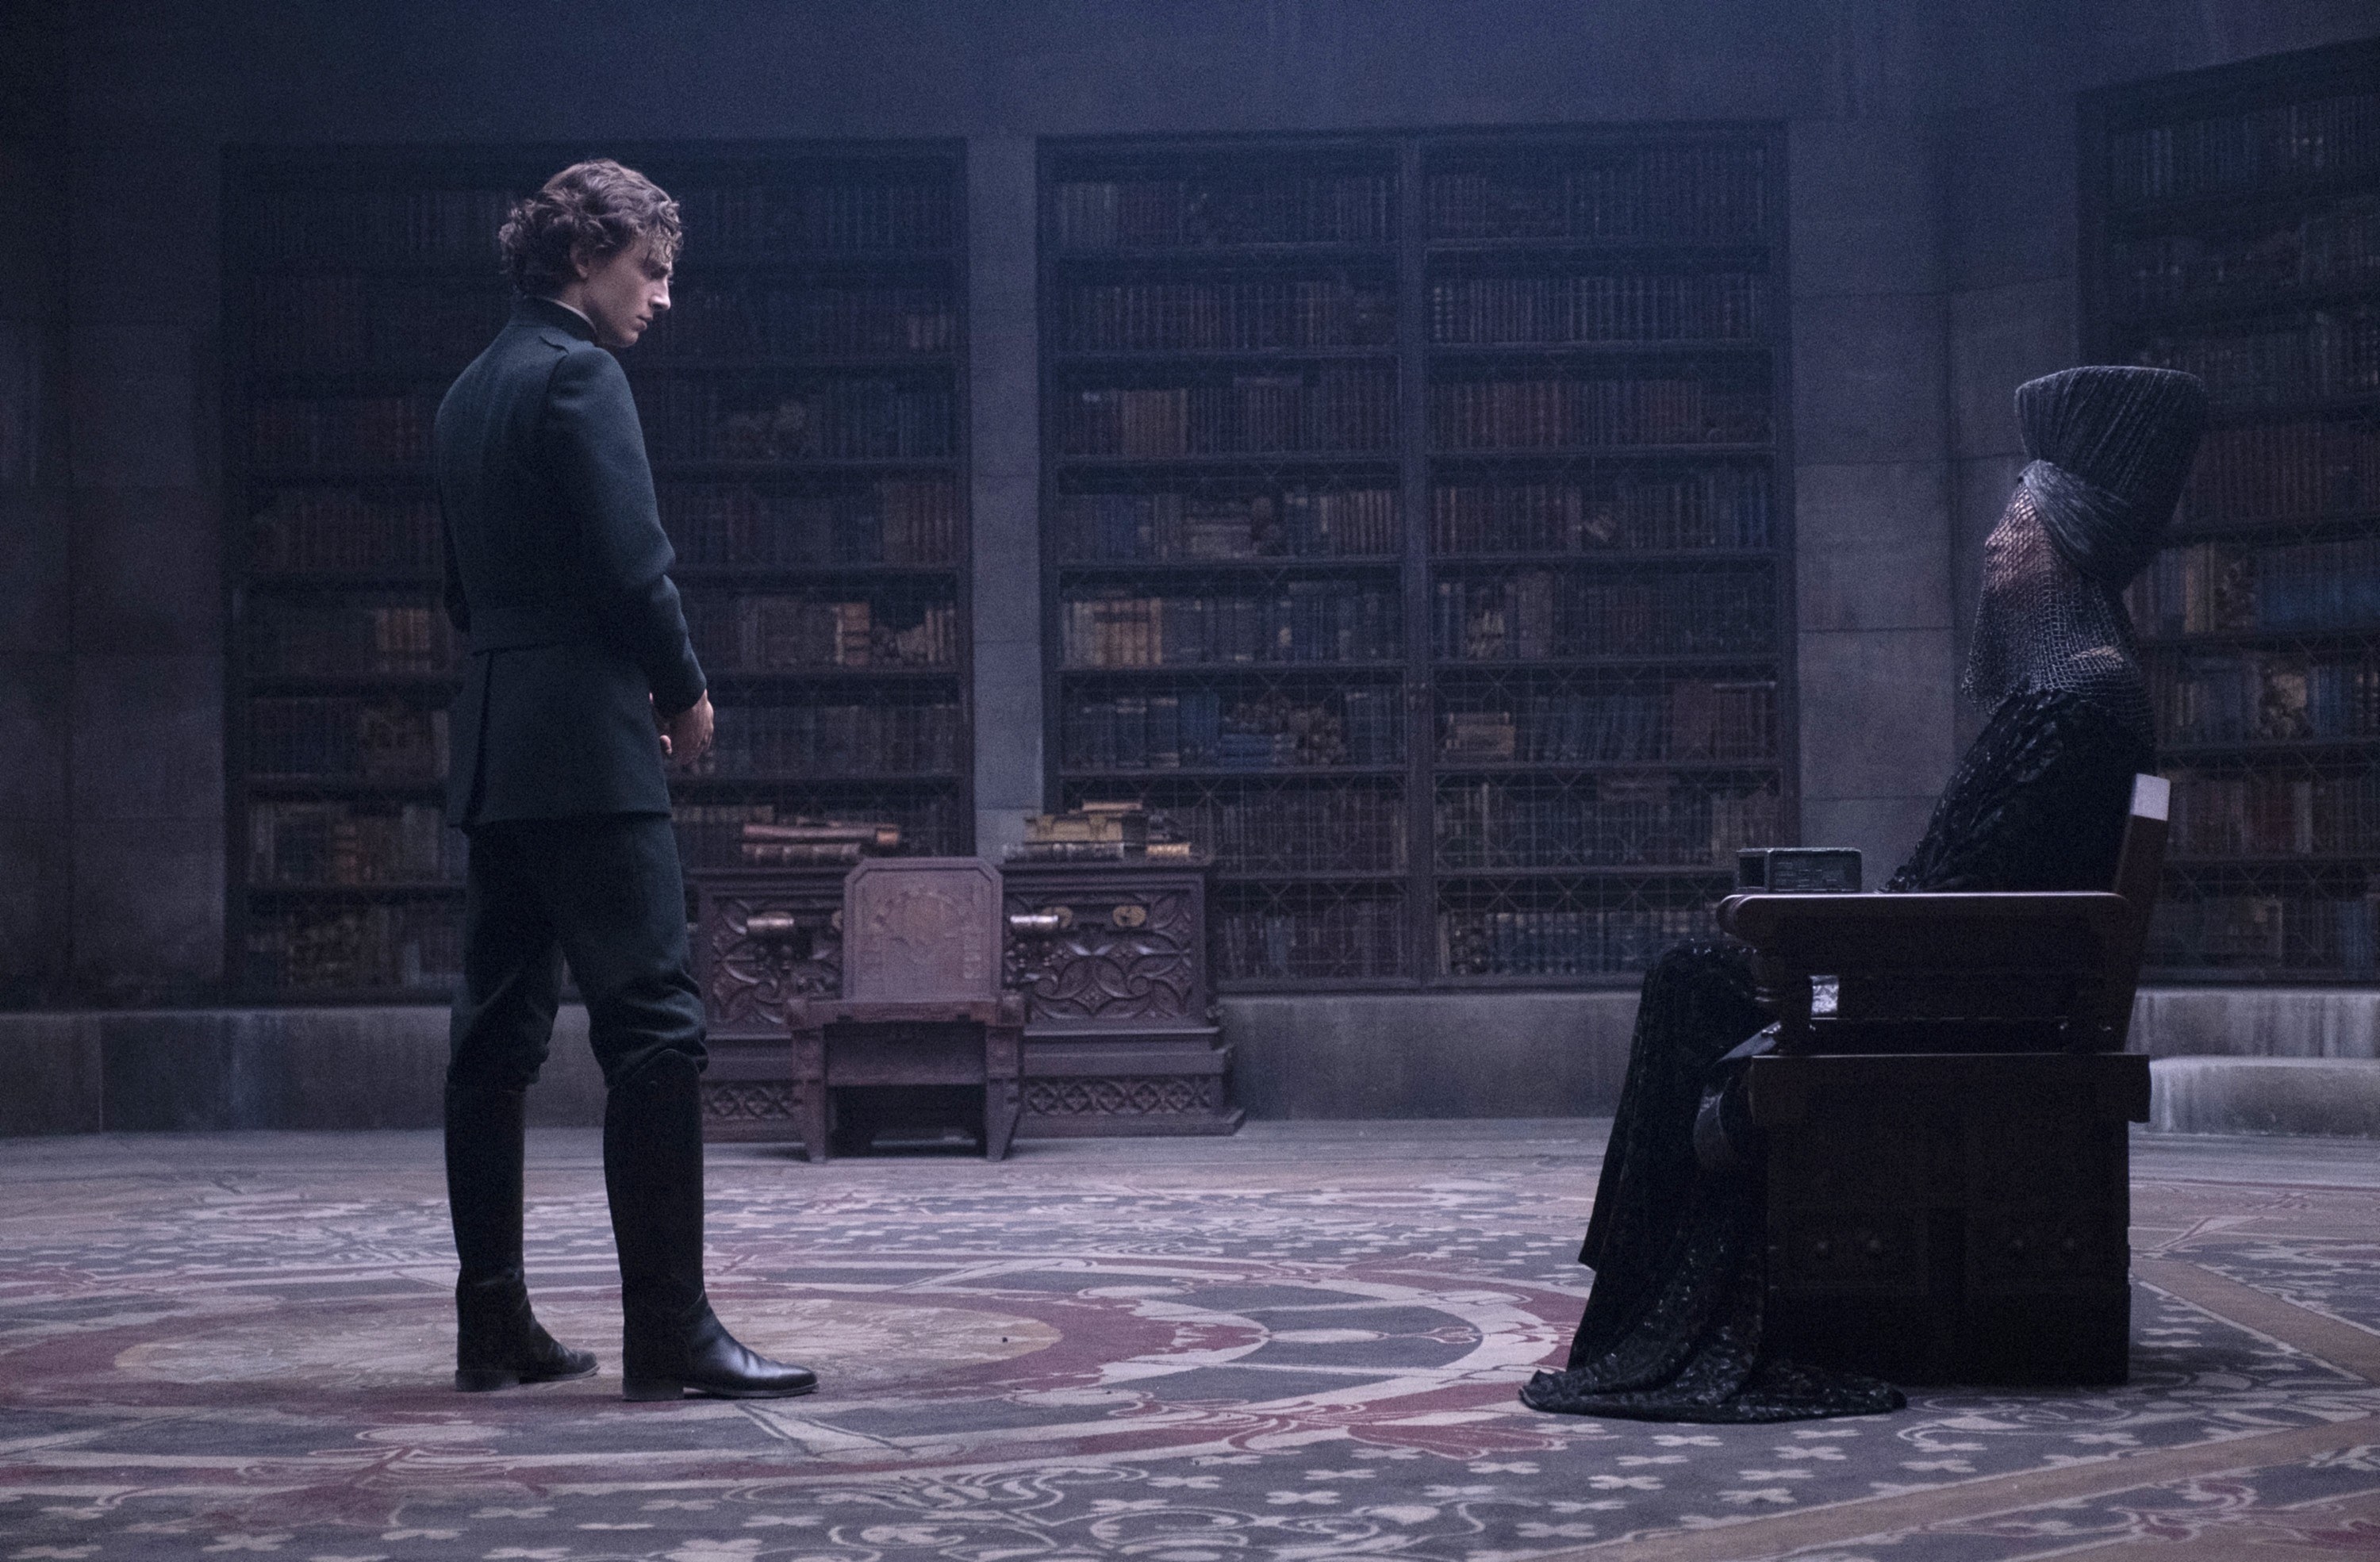 The mother superior (Charlotte Rampling) sitting in an old library talking to Paul